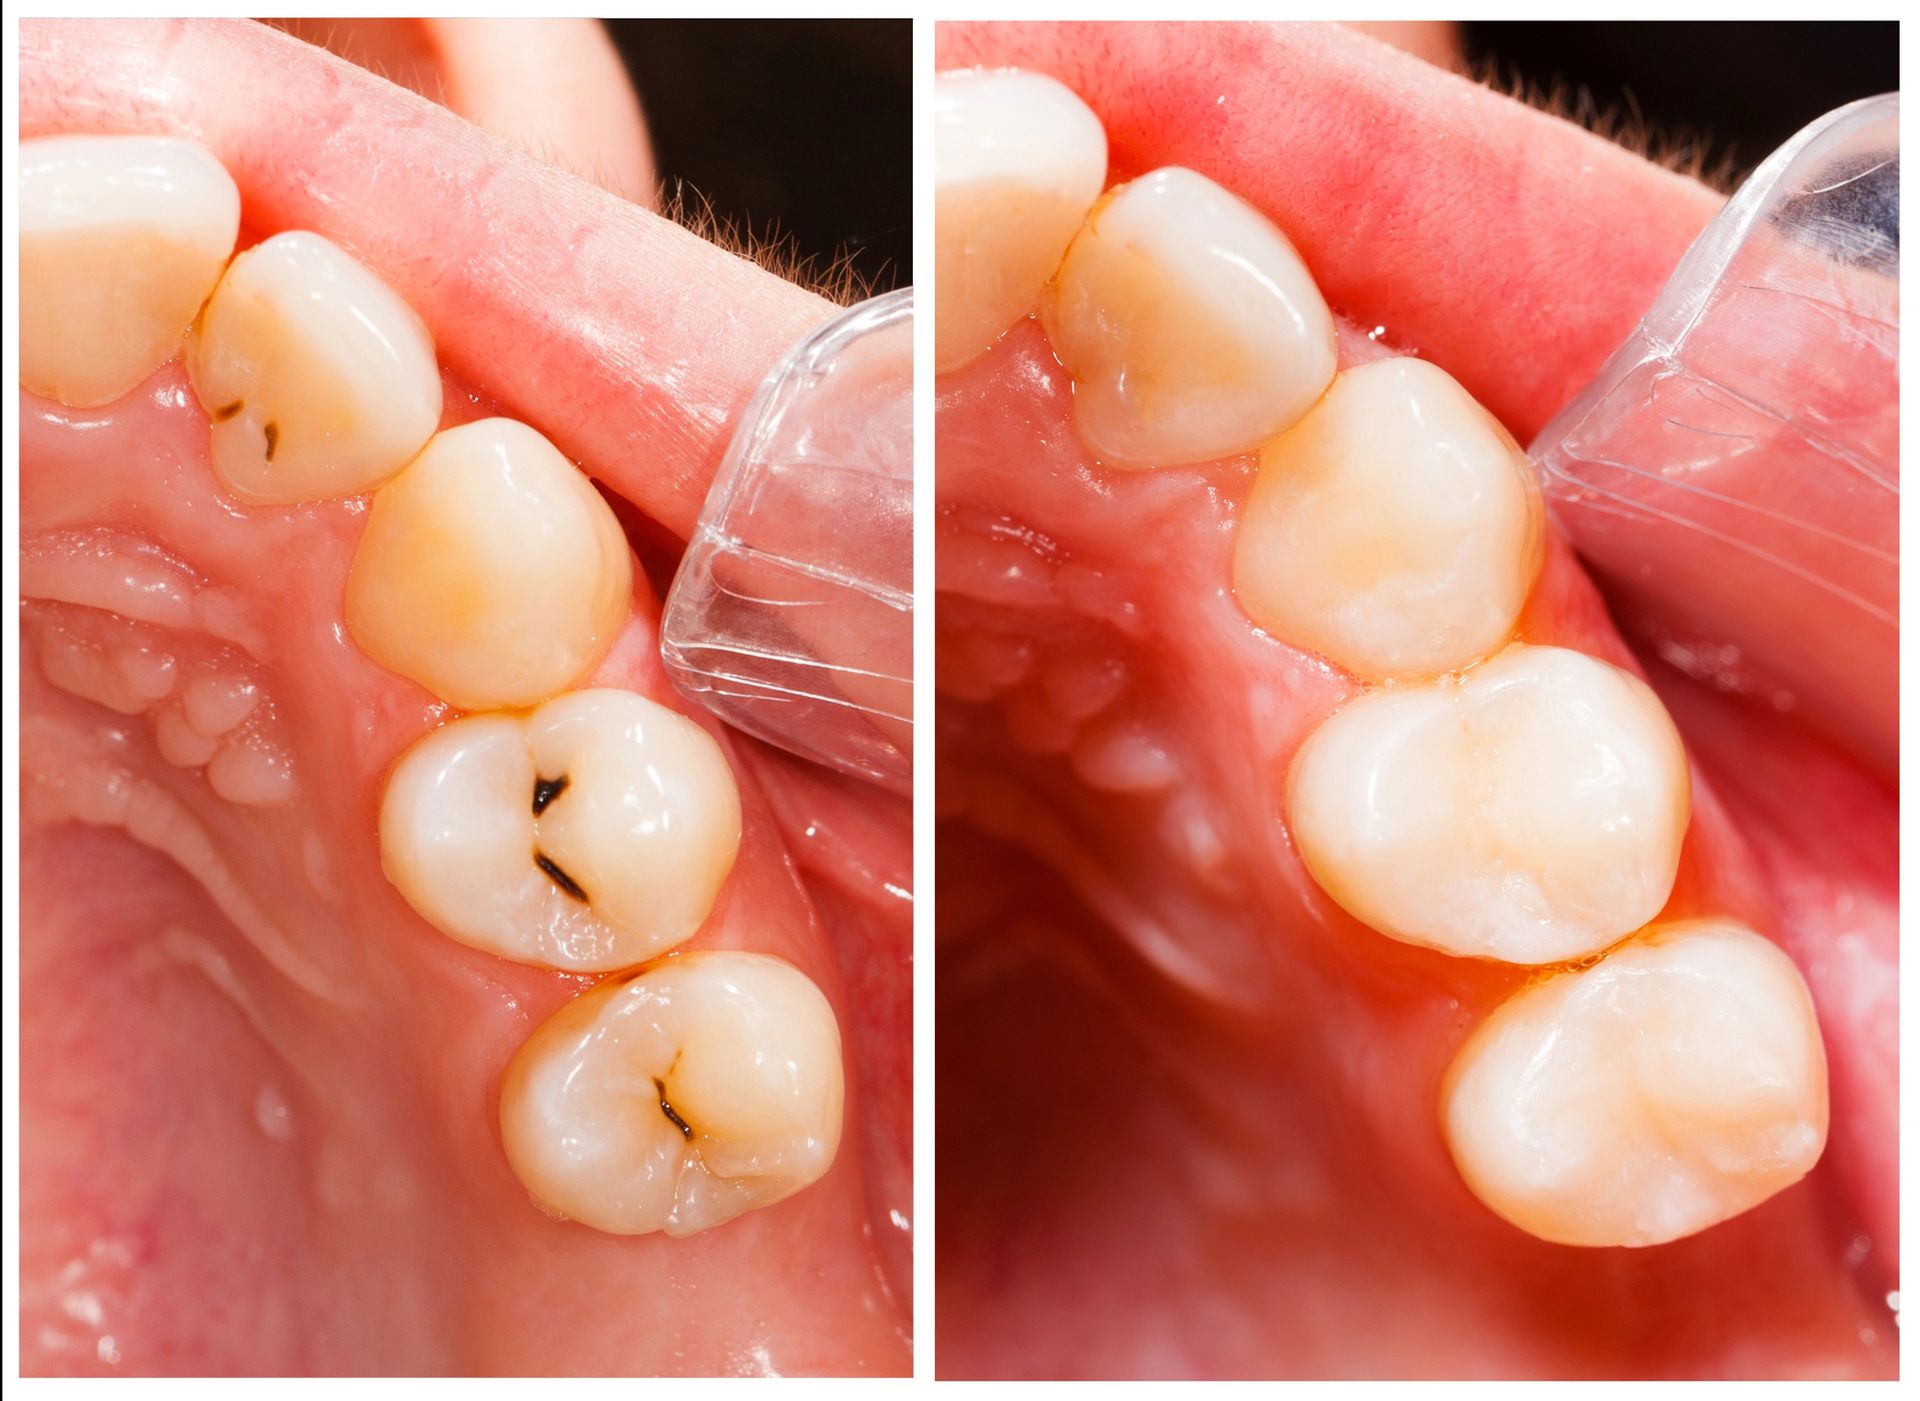 A before and after picture of a person 's teeth.